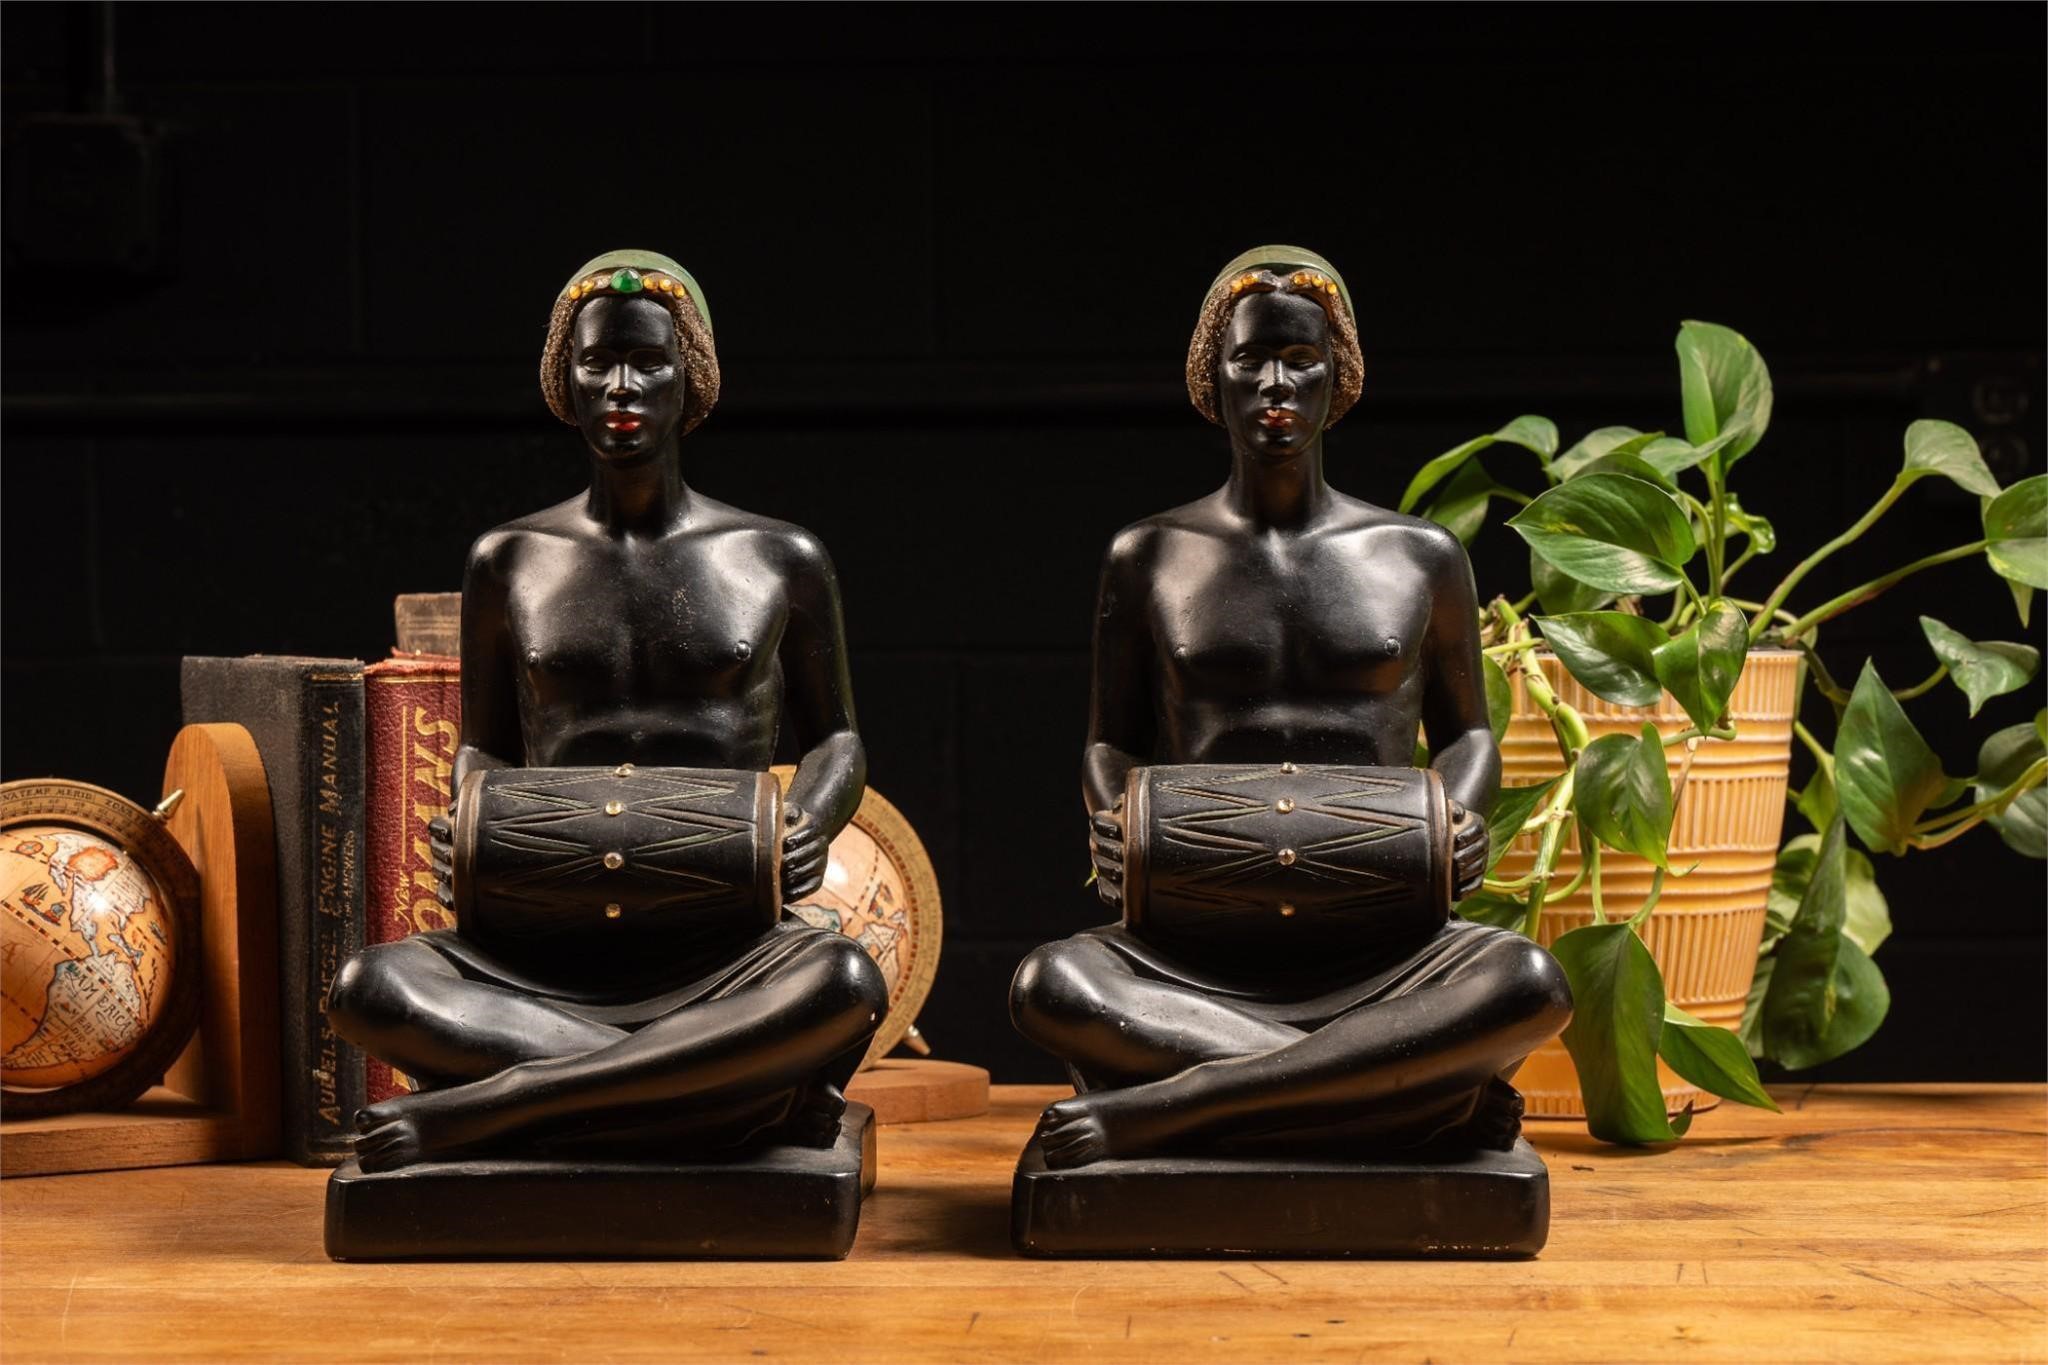 Pair of Sitting Nubian Man Sculptures by ABCO